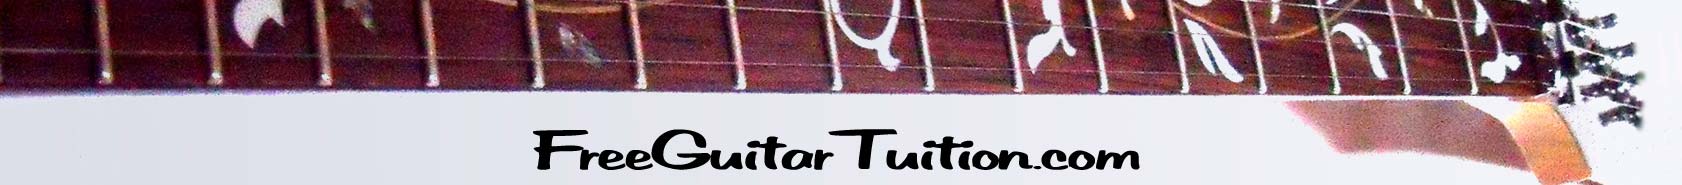 free guitar tuition